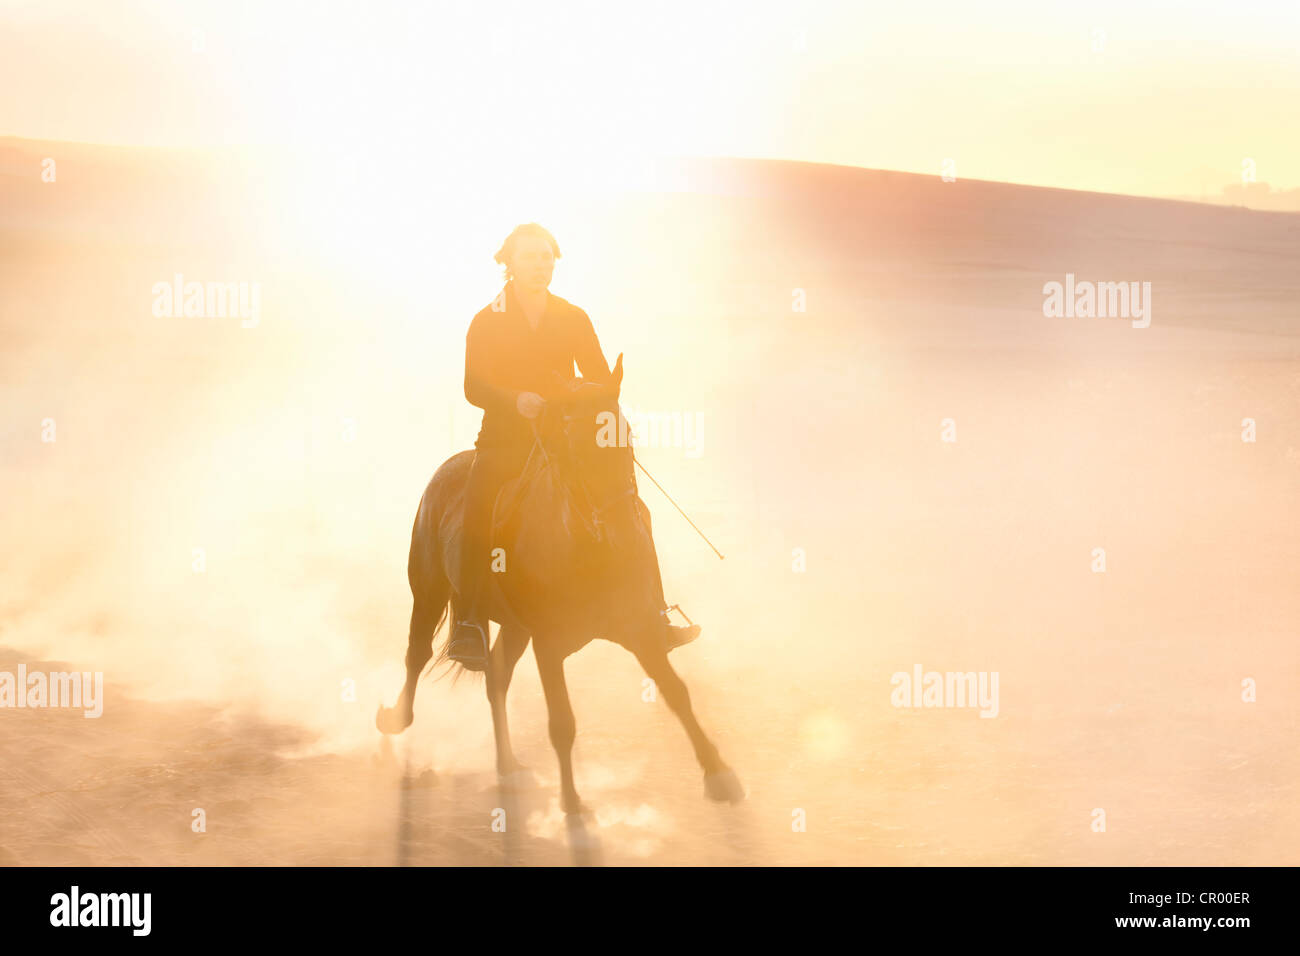 Silhouette of man riding horse in field Banque D'Images